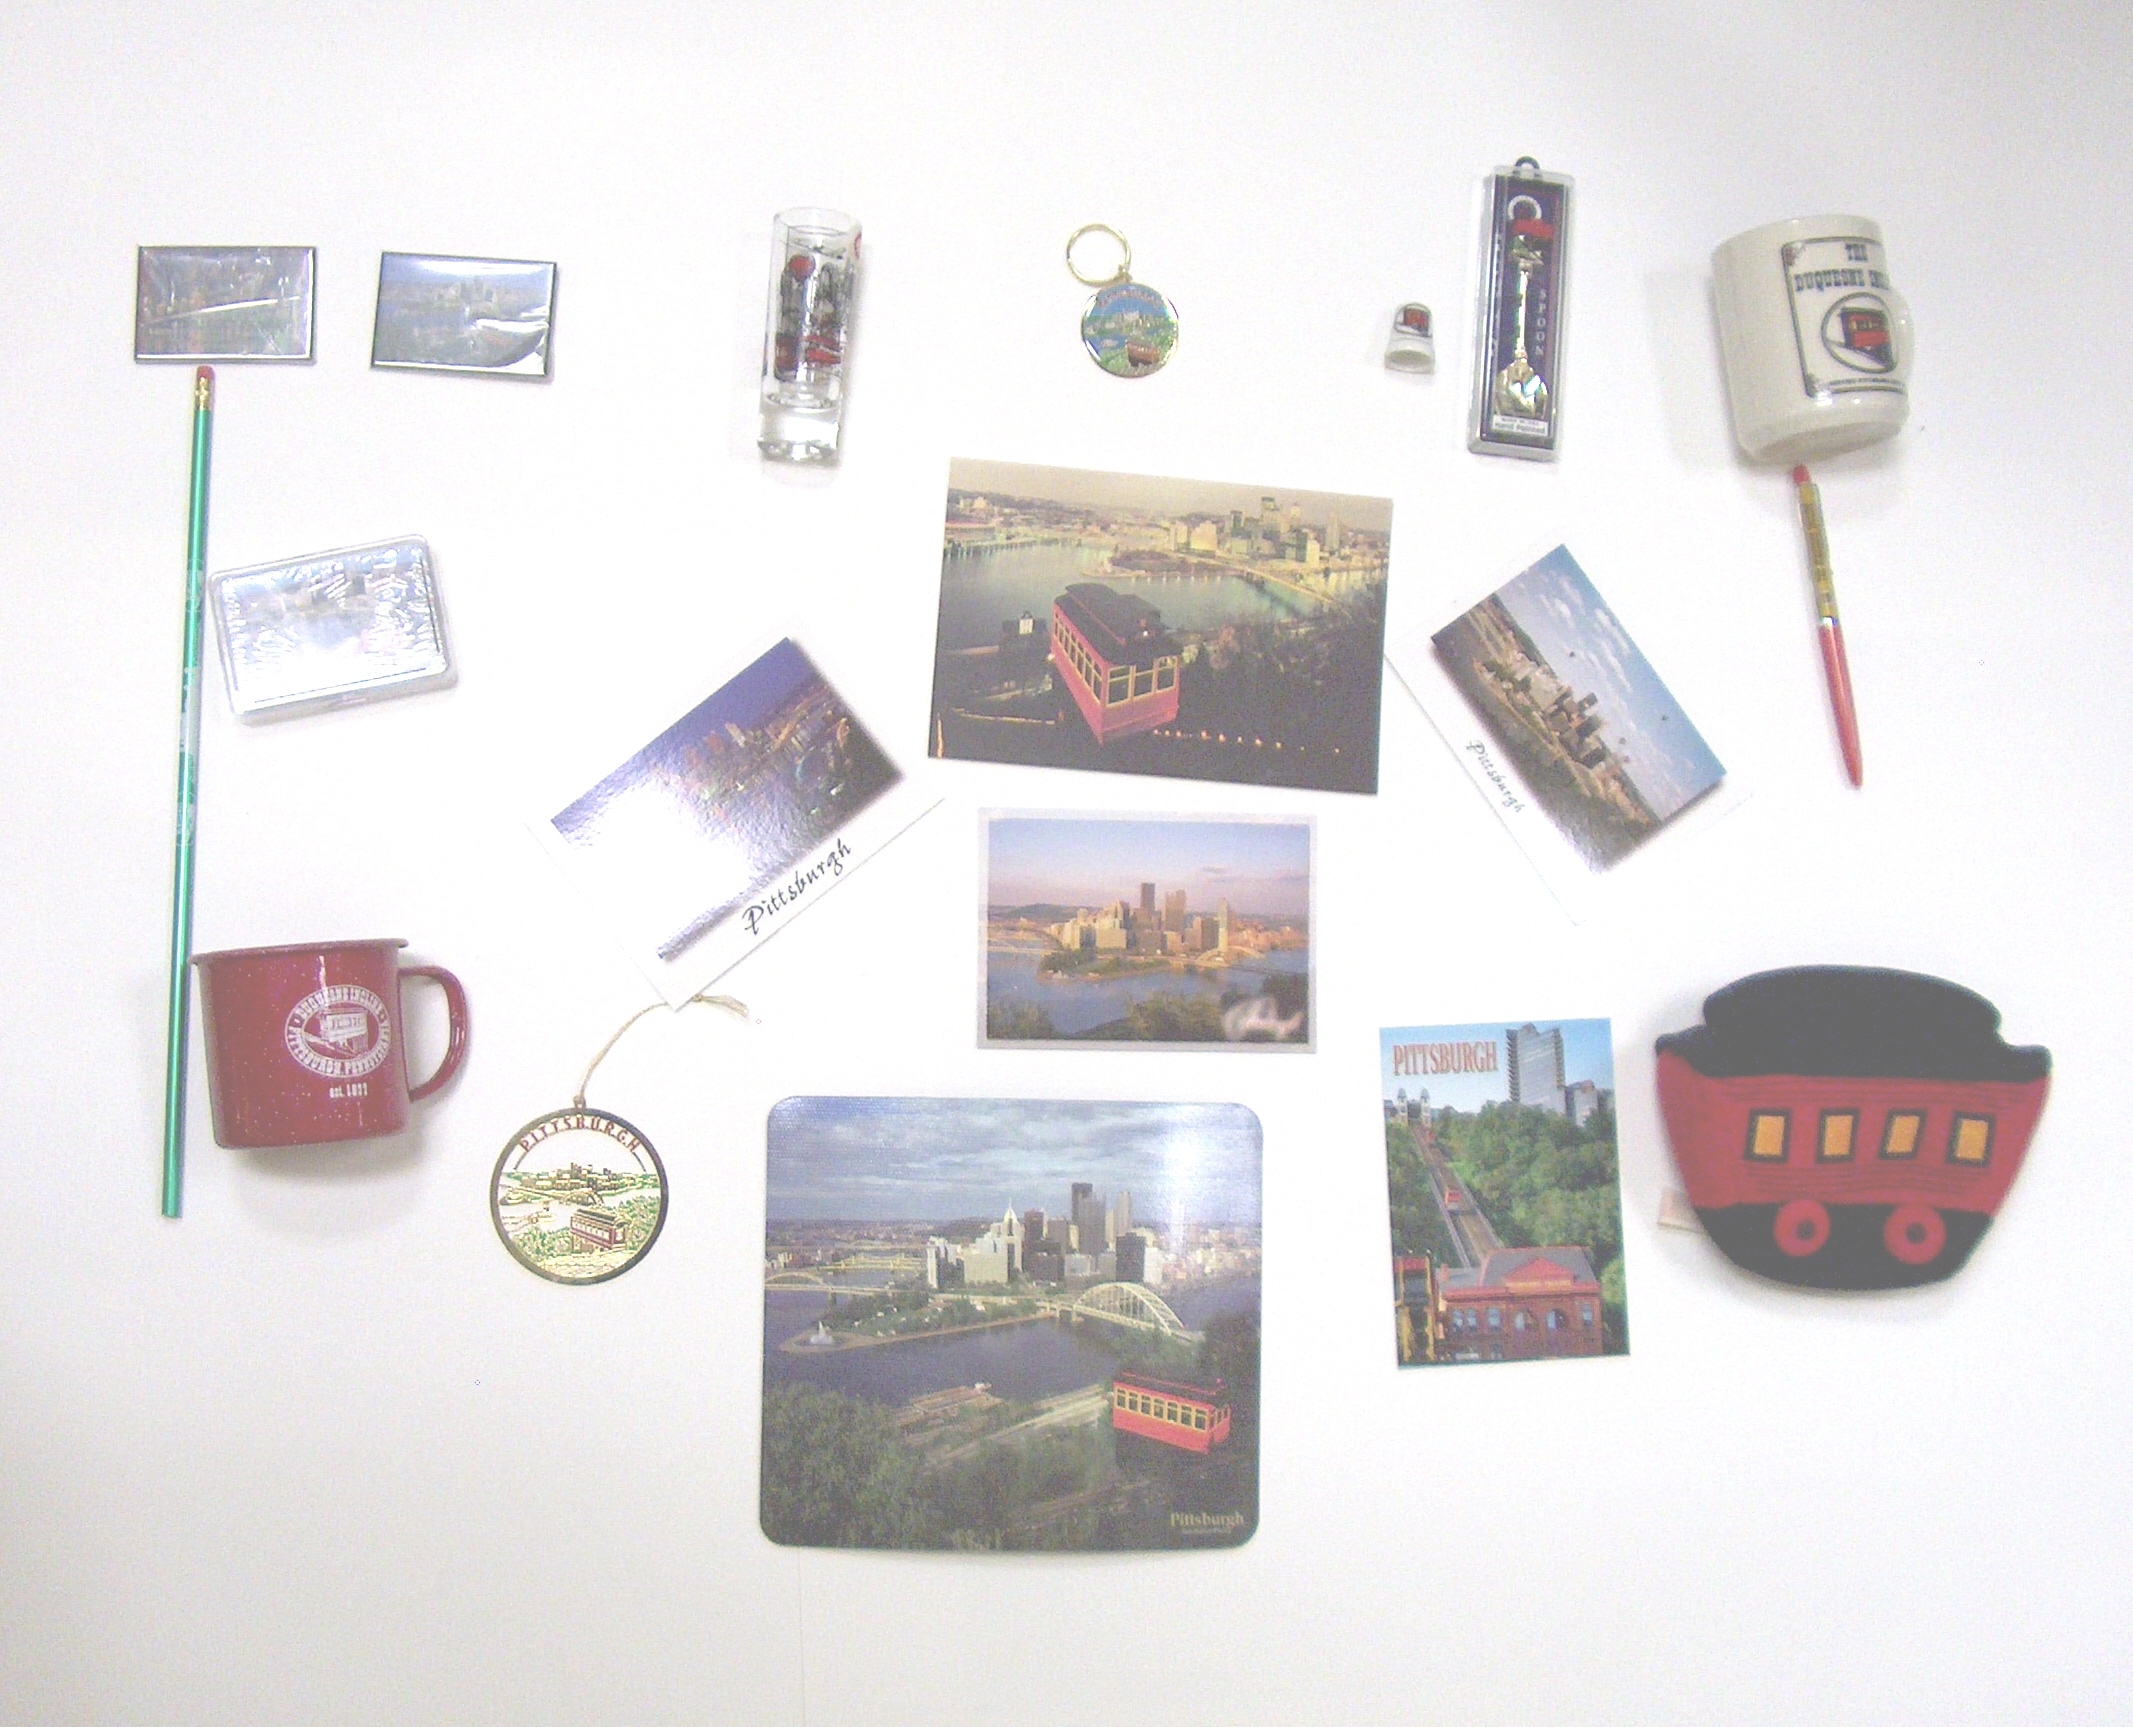 Postcards and Knick-Knacks for sale at Duquesne Incline